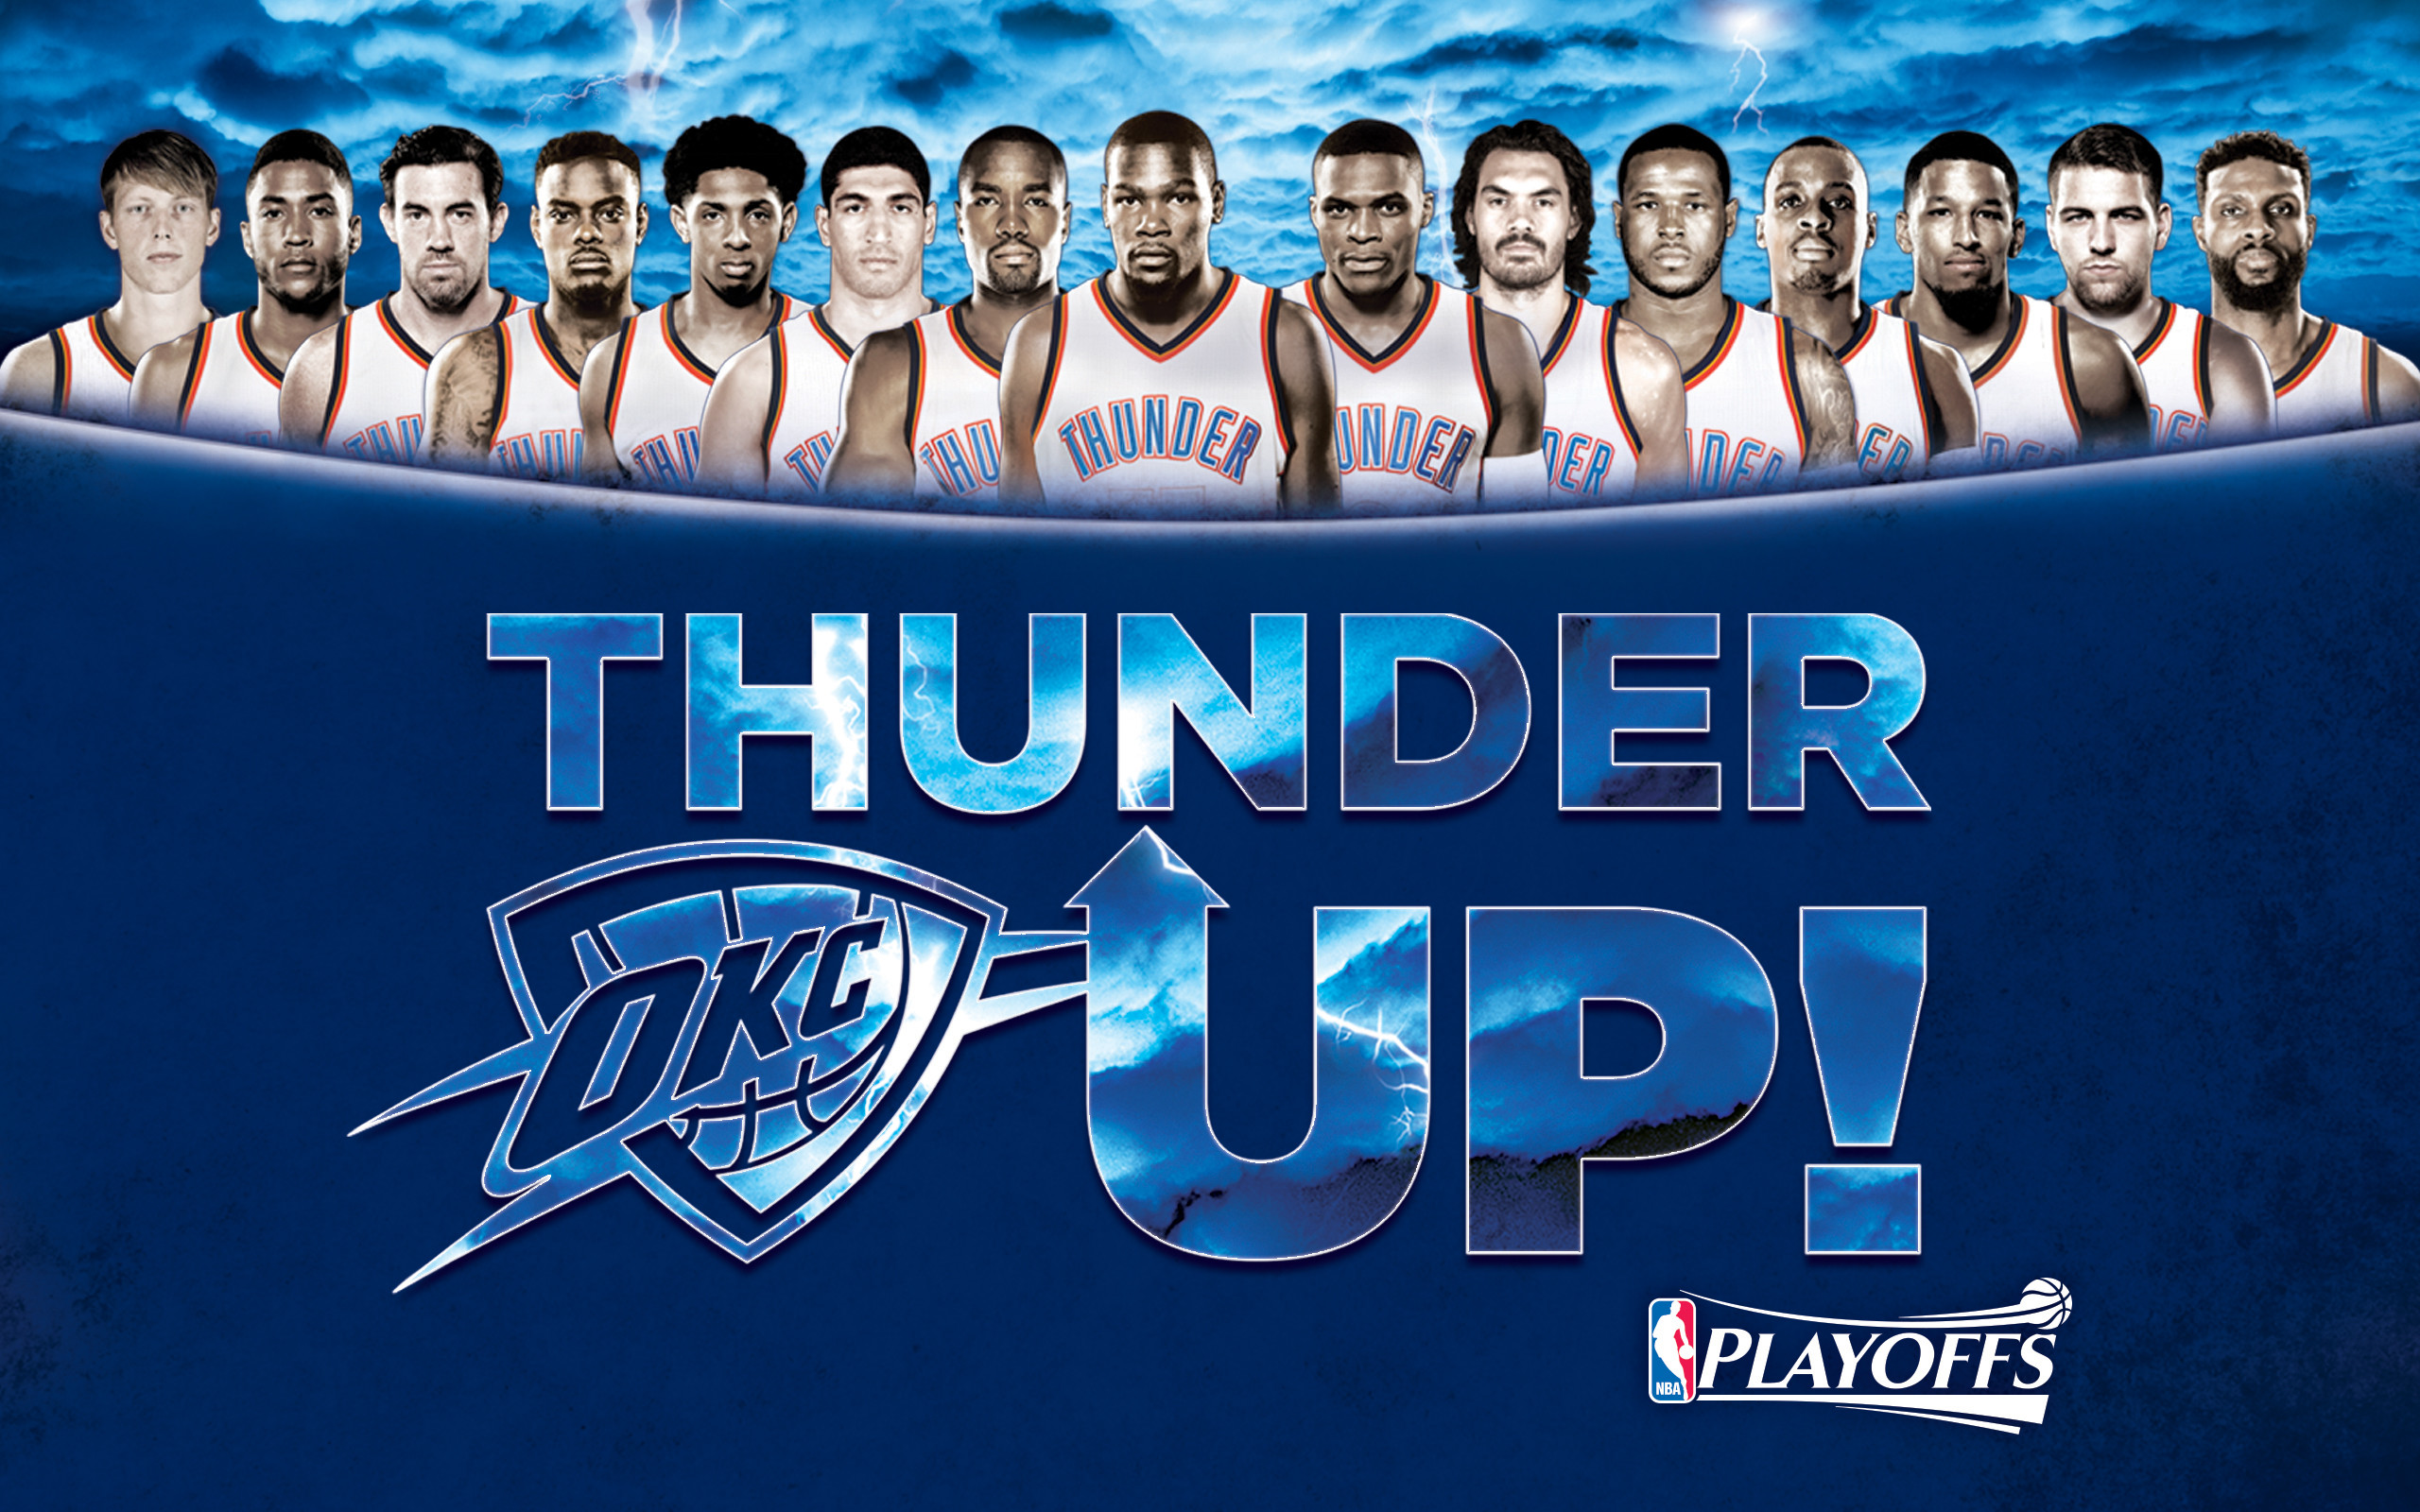 Oklahoma city thunder wallpaper hd pictures